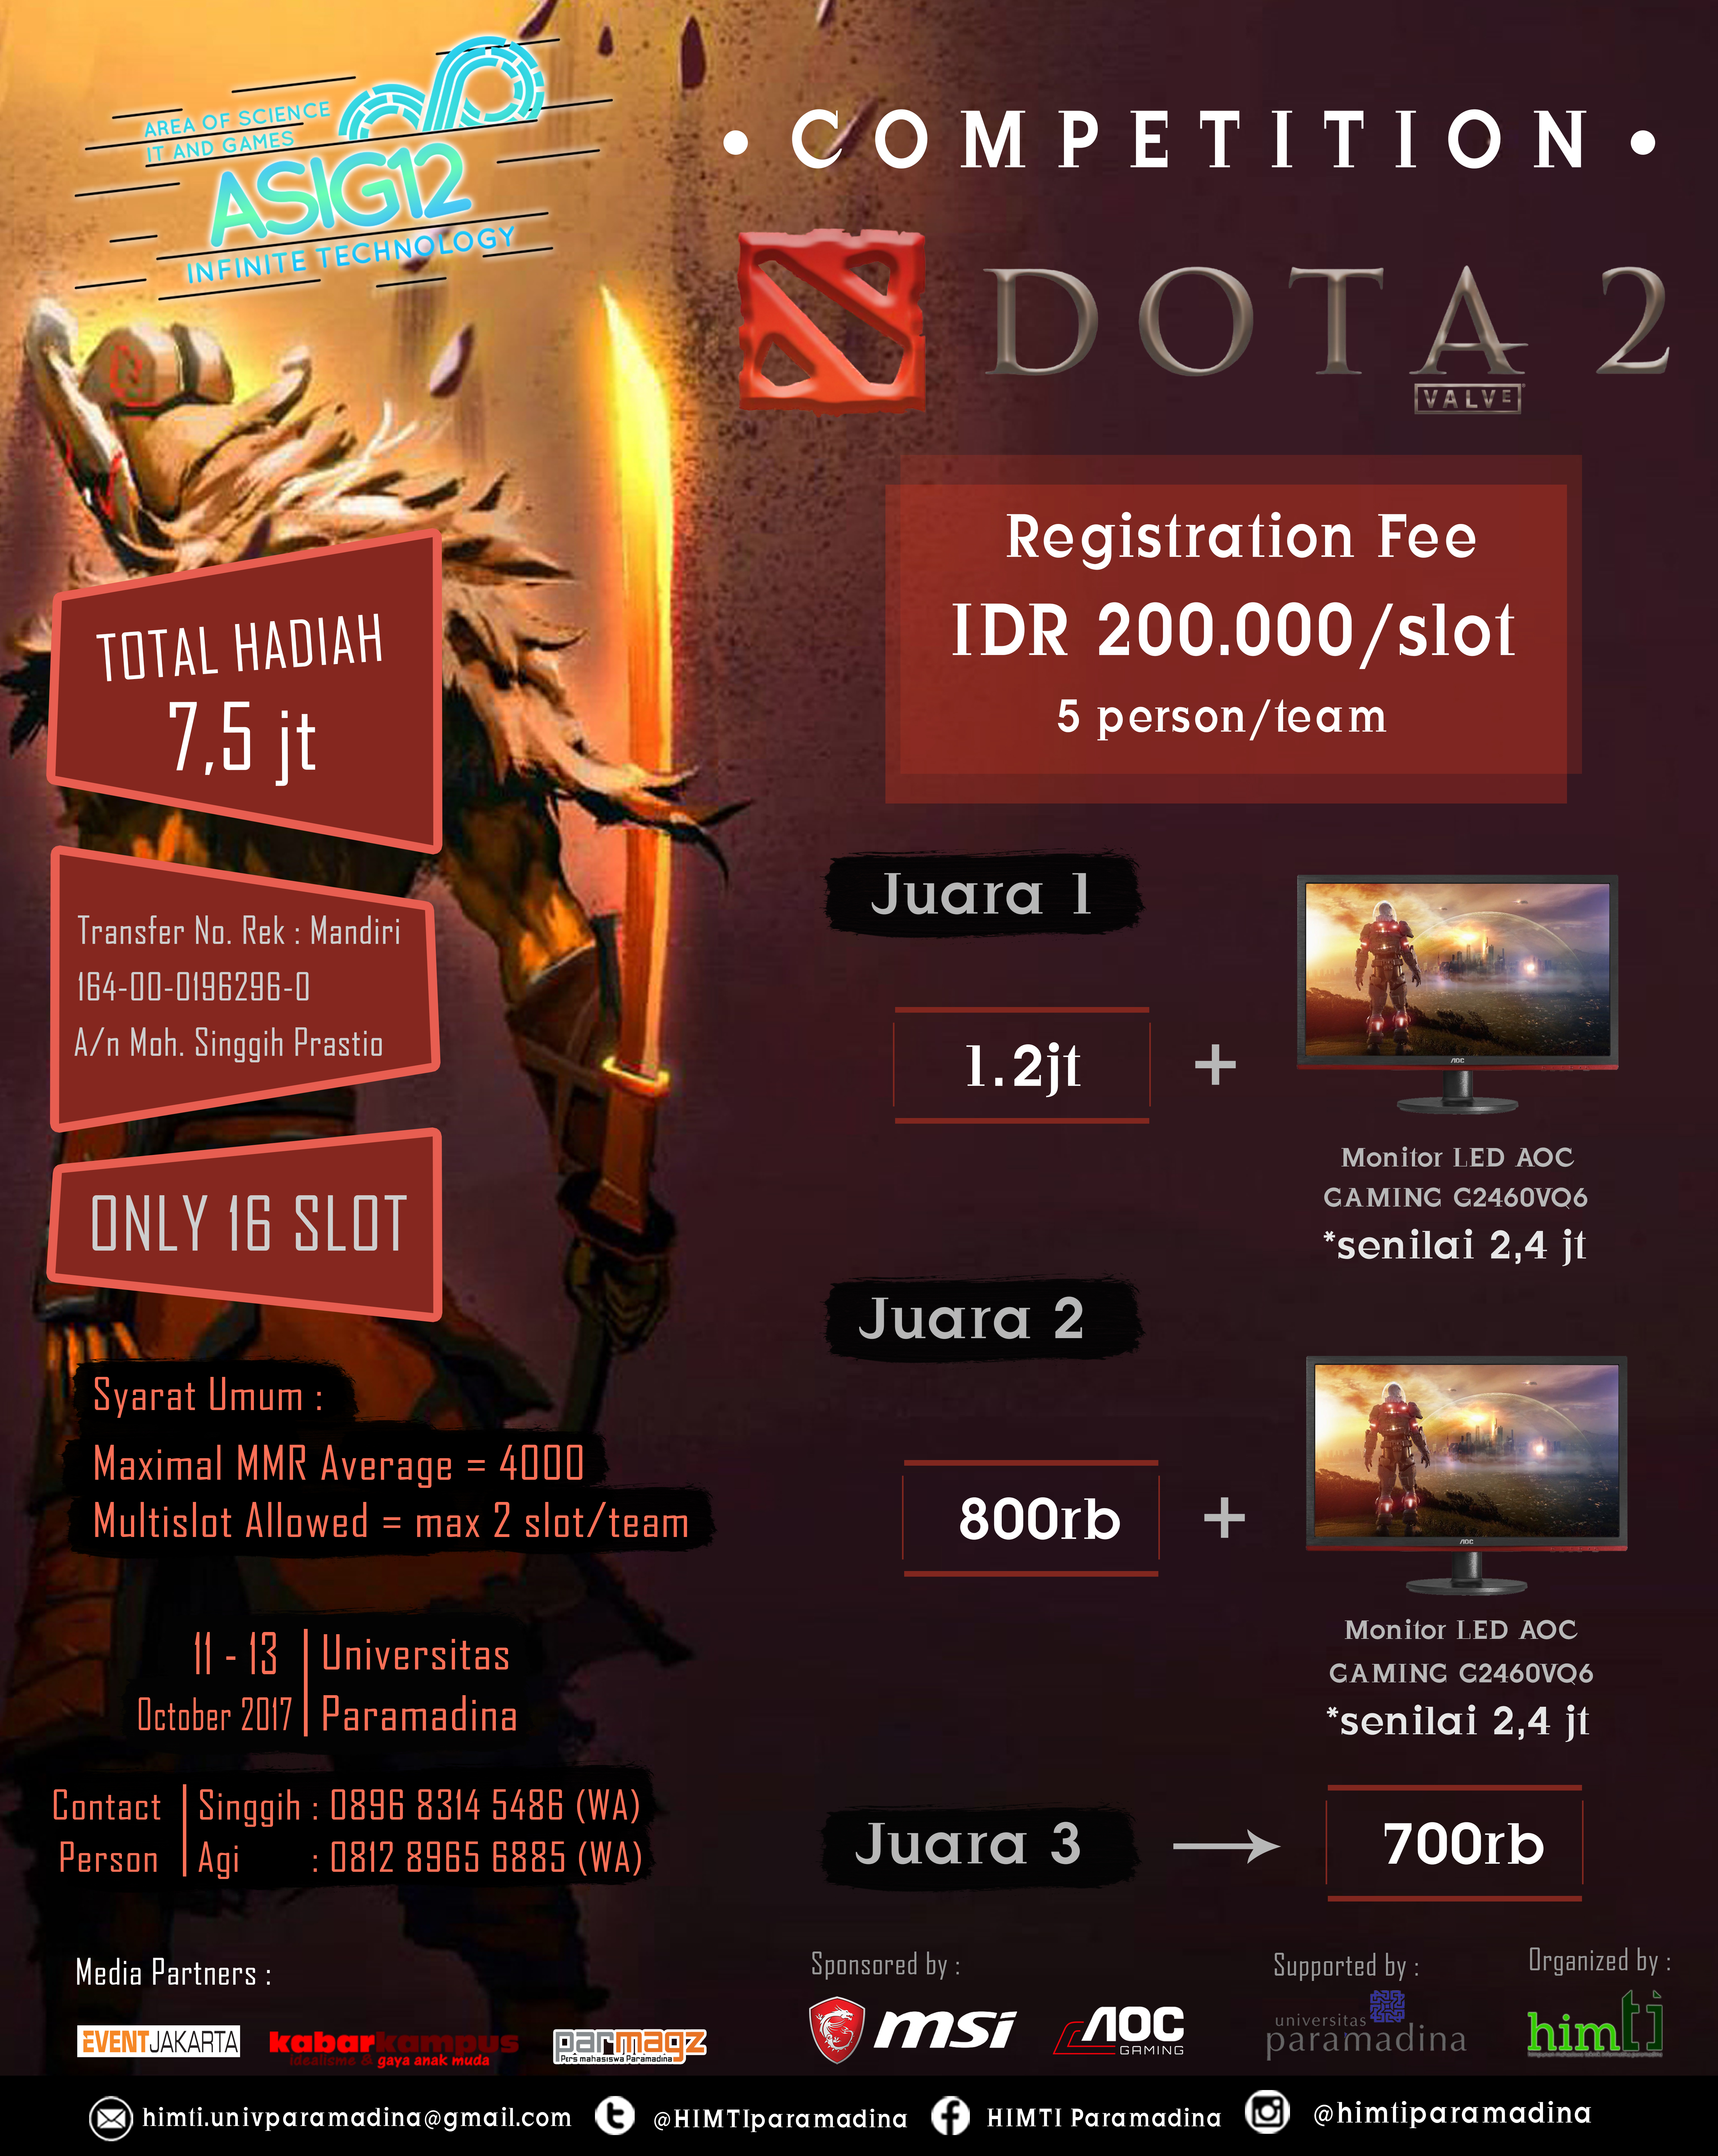 Competition Dota 2 || Total Hadiah 7,5 Jt || Only 16 Slot || Sponsored by : MSI &amp; AOC